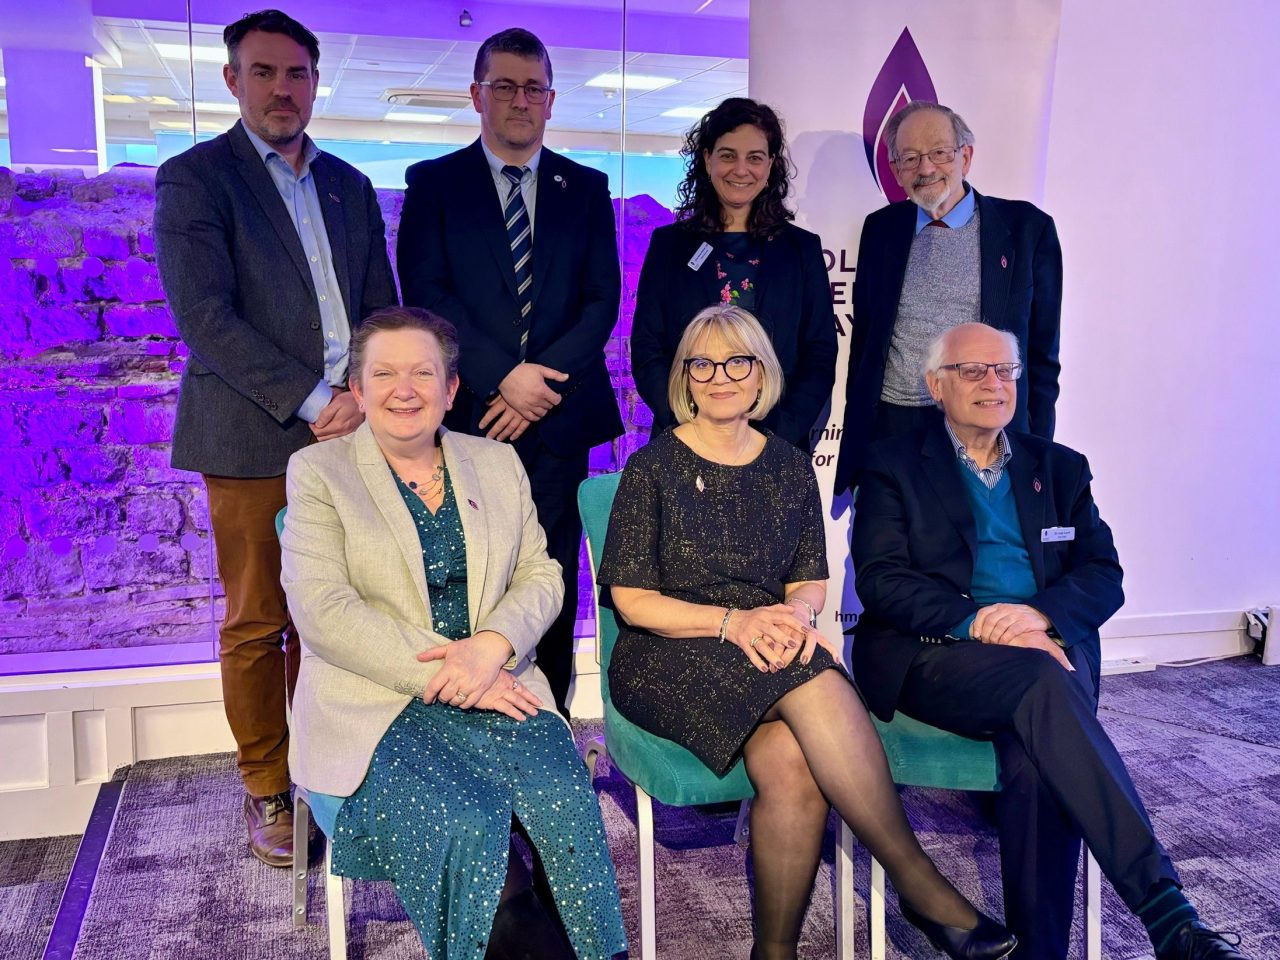 Left to right: Andy Lawrence MBE, HMD activity organiser, Safet Vukalić BEM, a survivor of the genocide in Bosnia, Olivia Marks-Woldman BEM, CEO of HMDT, Martin Stern MBE, Holocaust survivor, Tamara Finkelstein CB, Permanent Secretary at the Department for Environment, Food and Rural Affairs, Laura Marks CBE, HMDT Chair, Sir Leigh Lewis KCB, HMDT Vice Chair